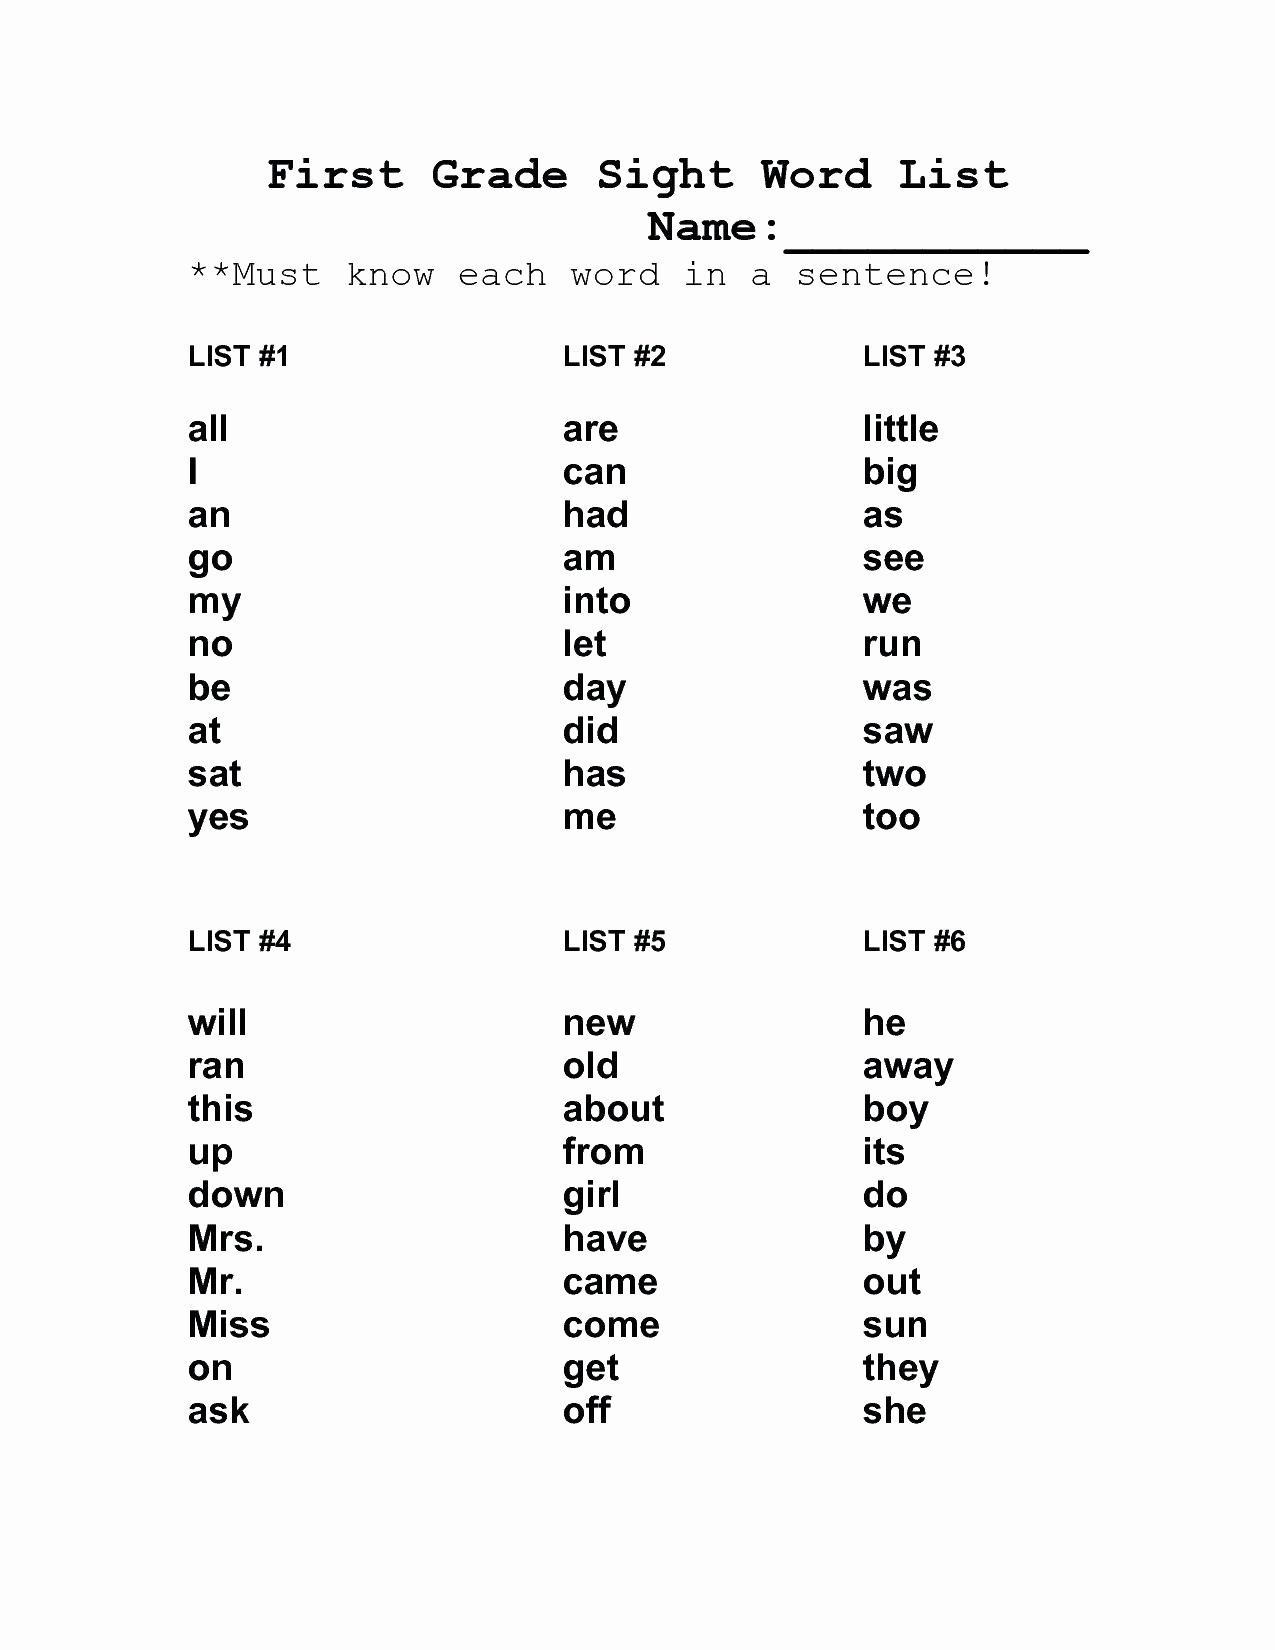 Vocabulary Worksheets for 1st Graders Fresh 1st Grade Worksheet Sight Words to Educations 1st Grade